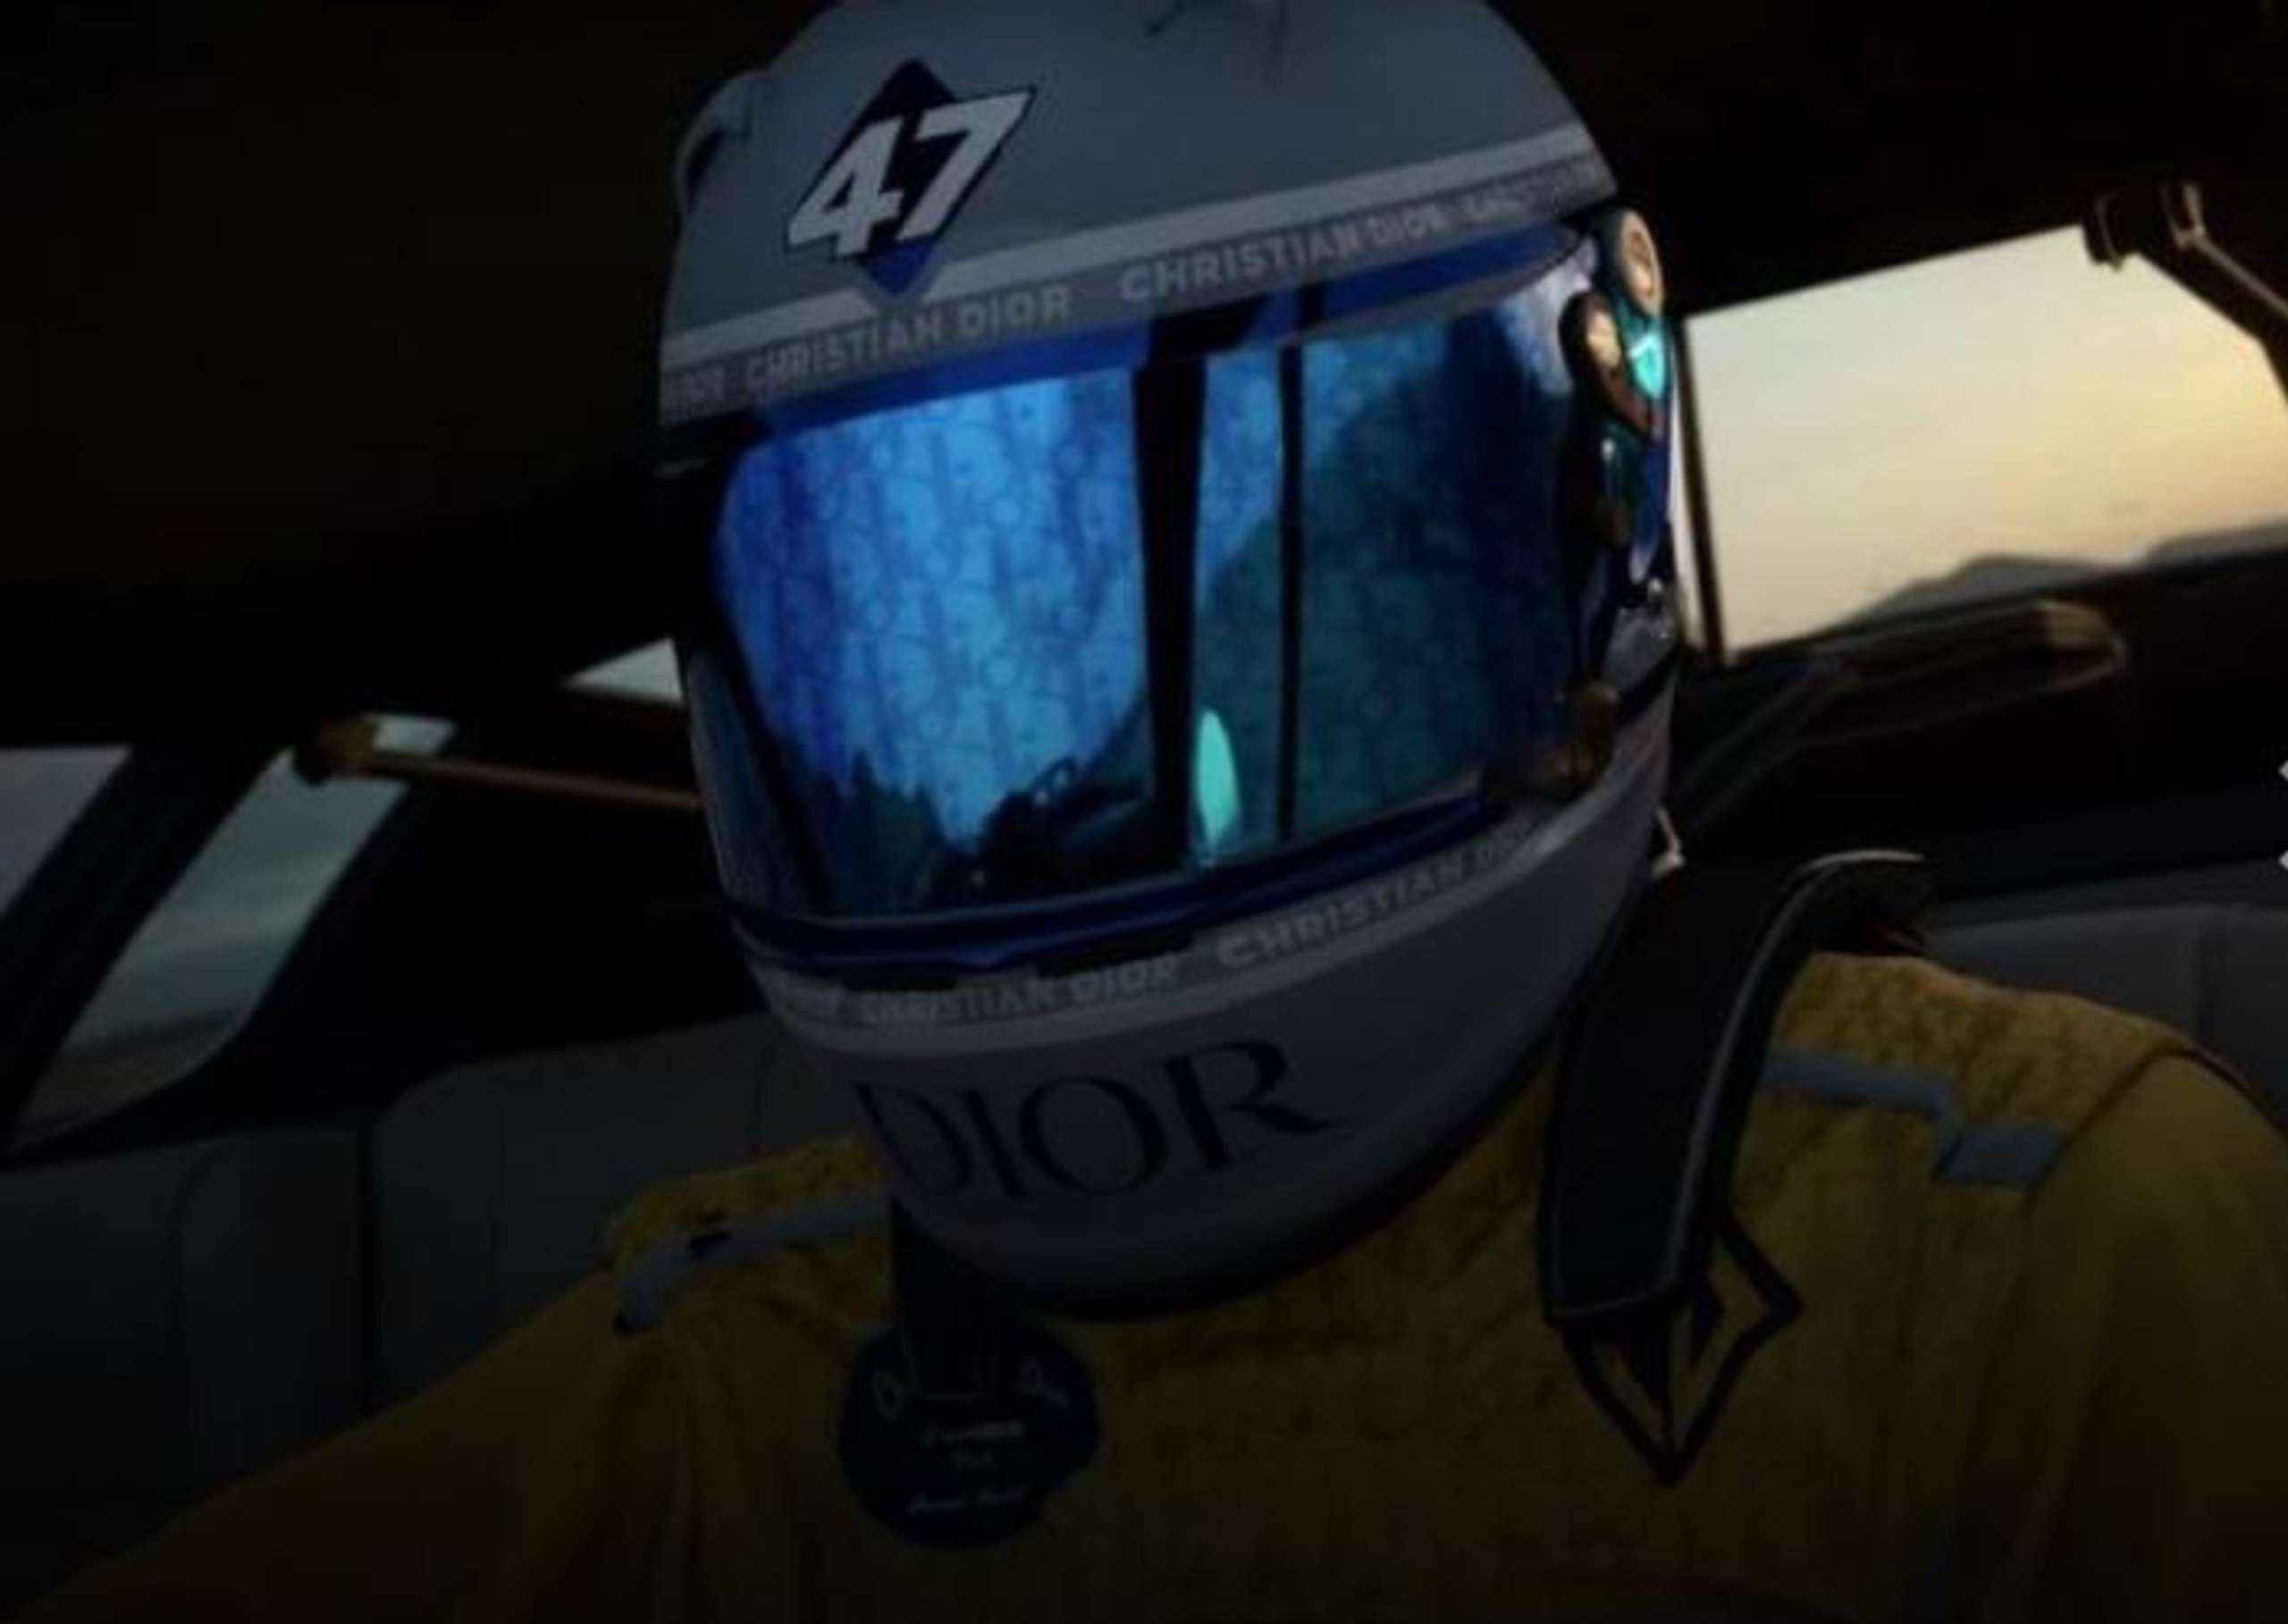 Gran Turismo Introduces A Collaboration With Dior And Updates GT7 With Exclusive Race Gear And Vehicles